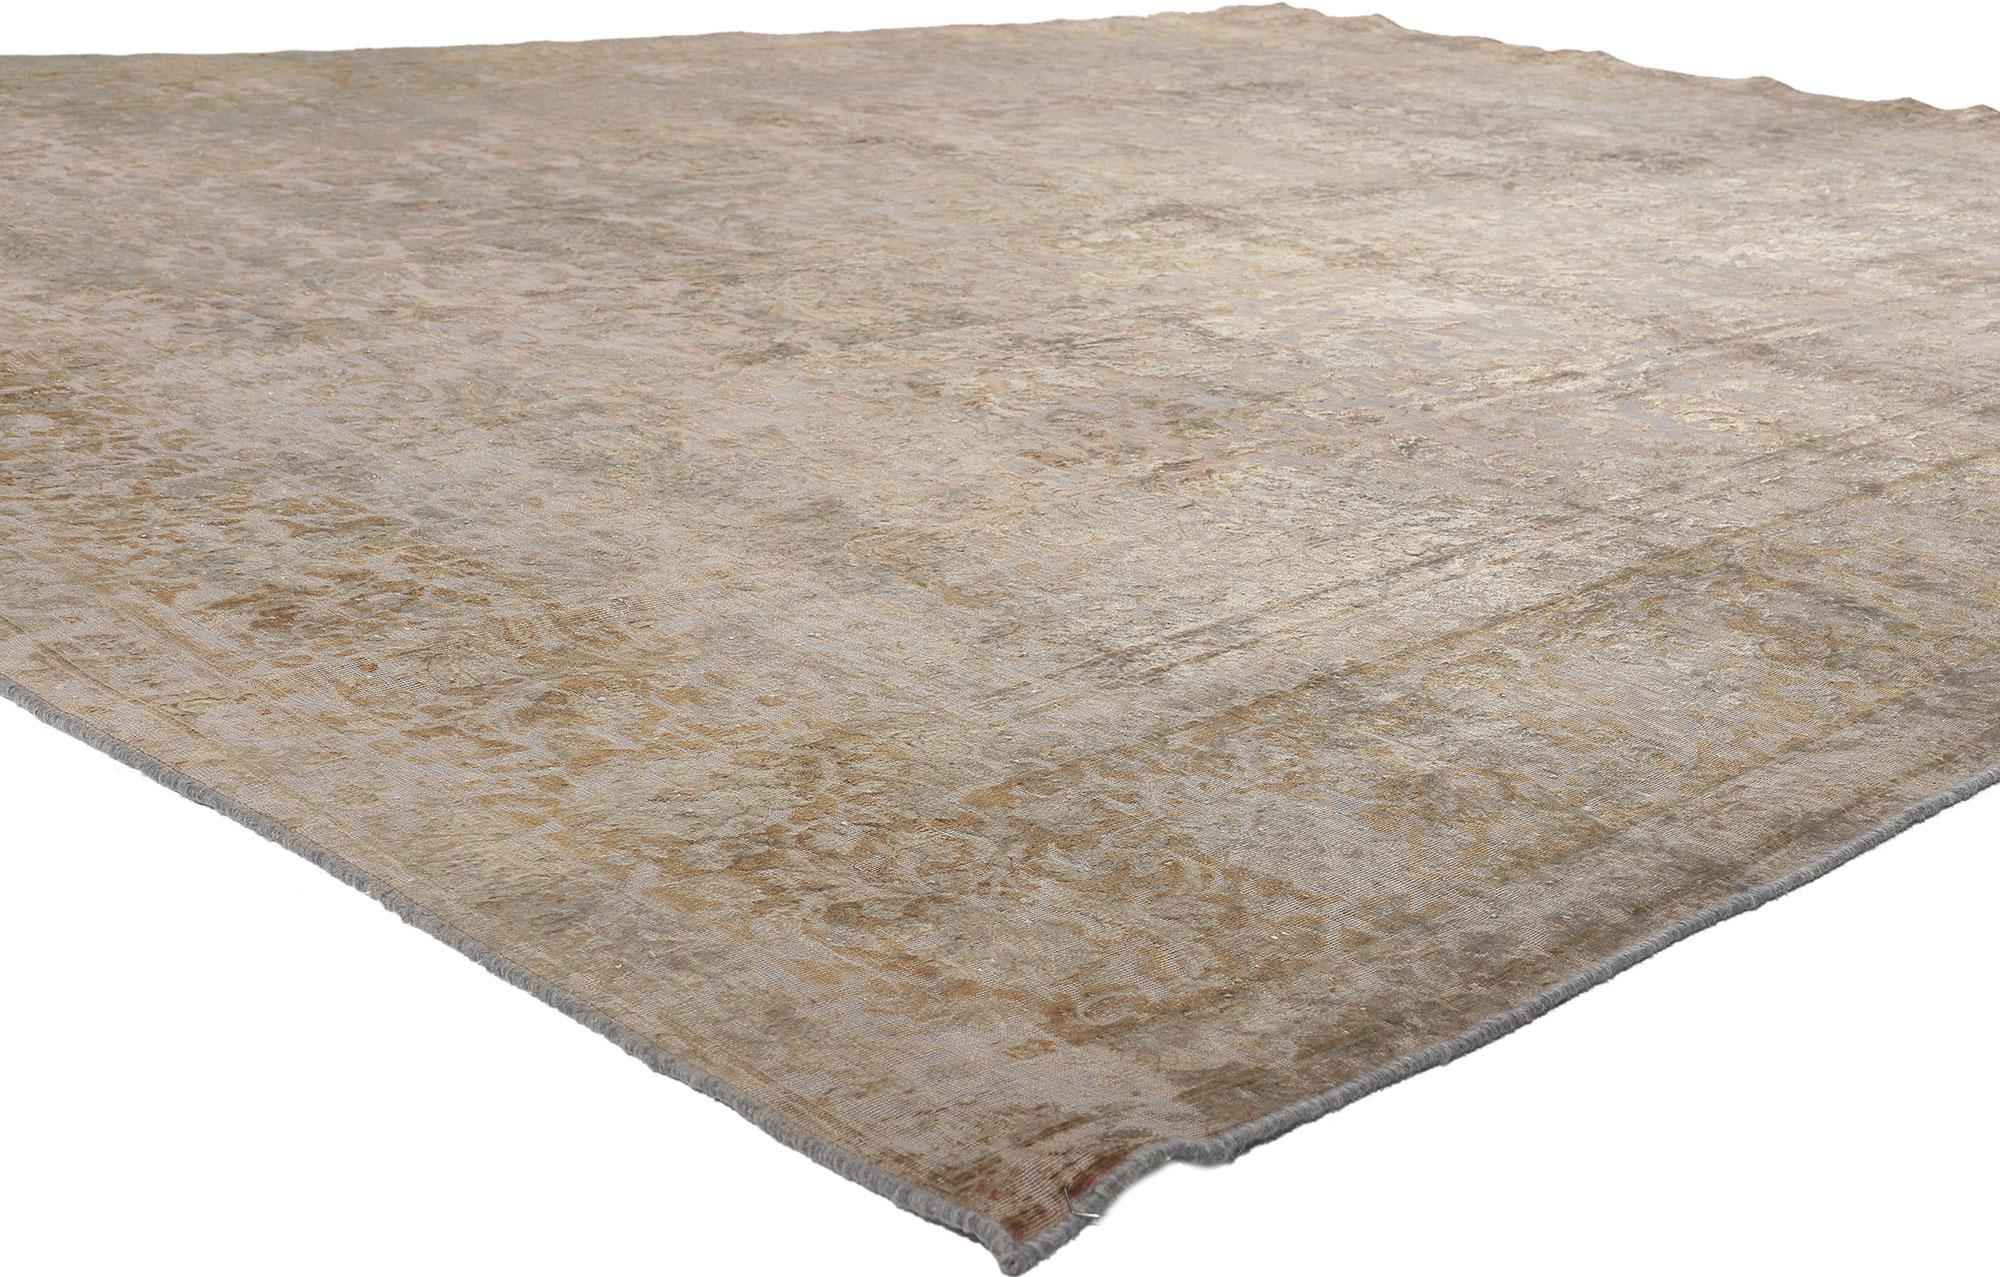 60609 Vintage Turkish Overdyed Rug, 09'06 x 12'09.
French Industrial meets quiet sophistication in this hand knotted wool vintage Turkish overdyed rug. The inconspicuous botanical design and mellow colorway in this piece work together resulting in a